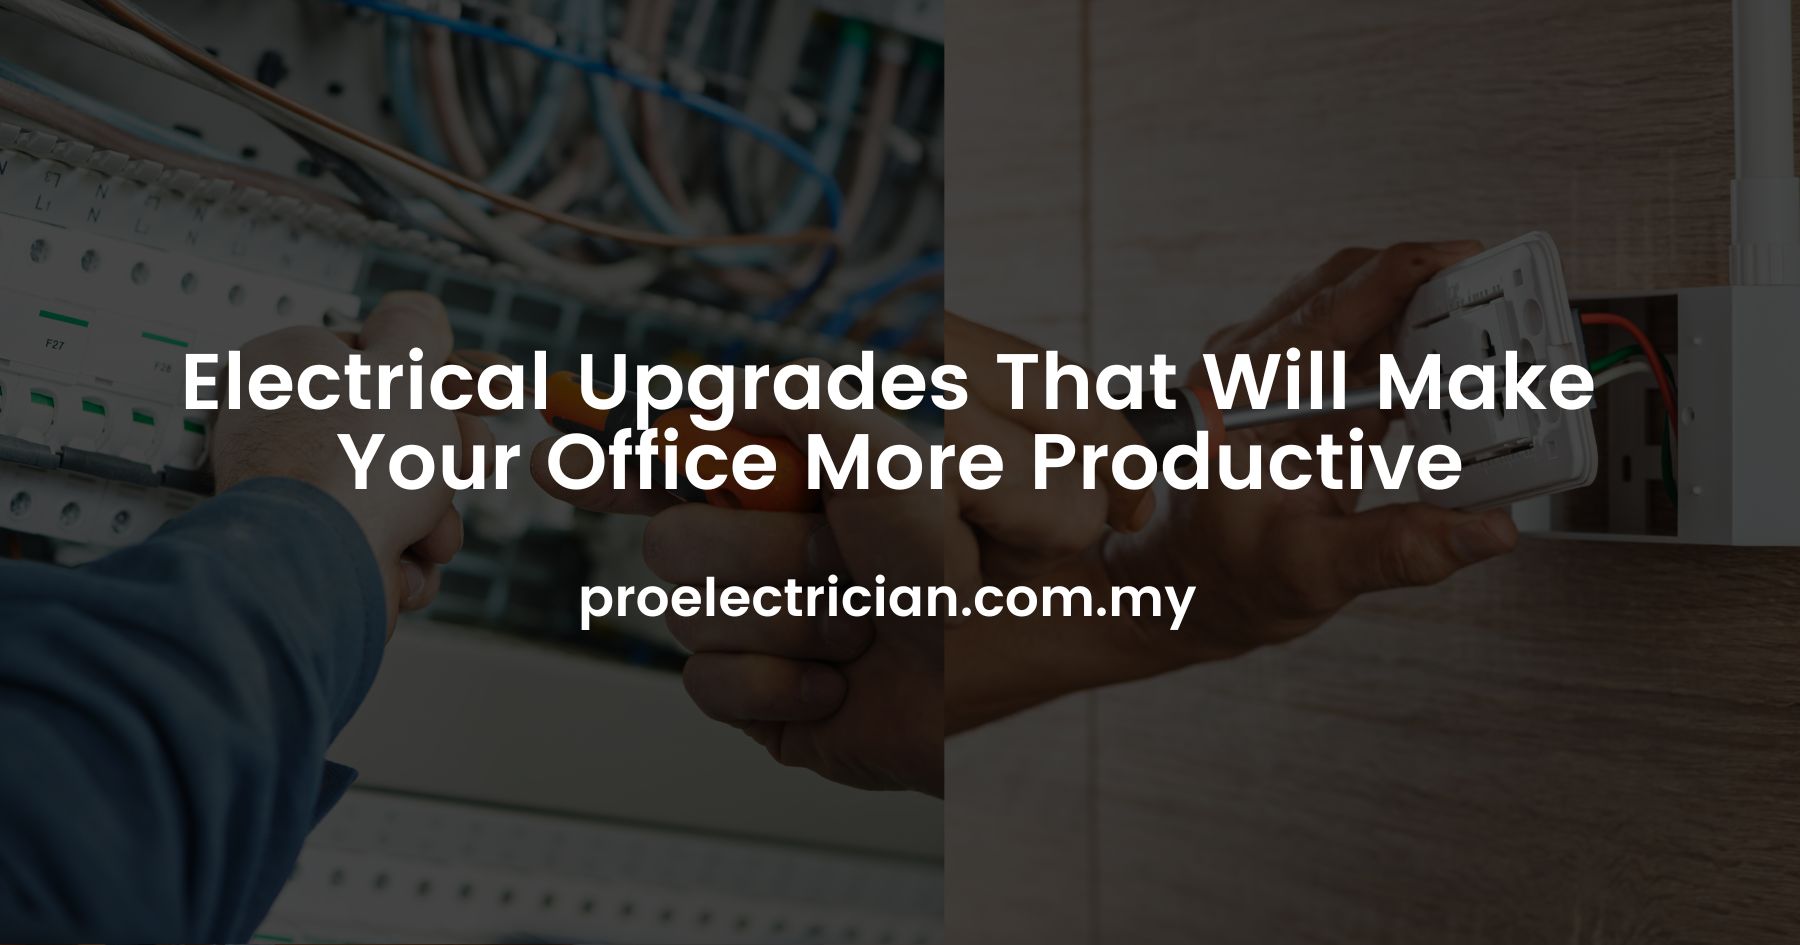 Electrical Upgrades That Will Make Your Office More Productive